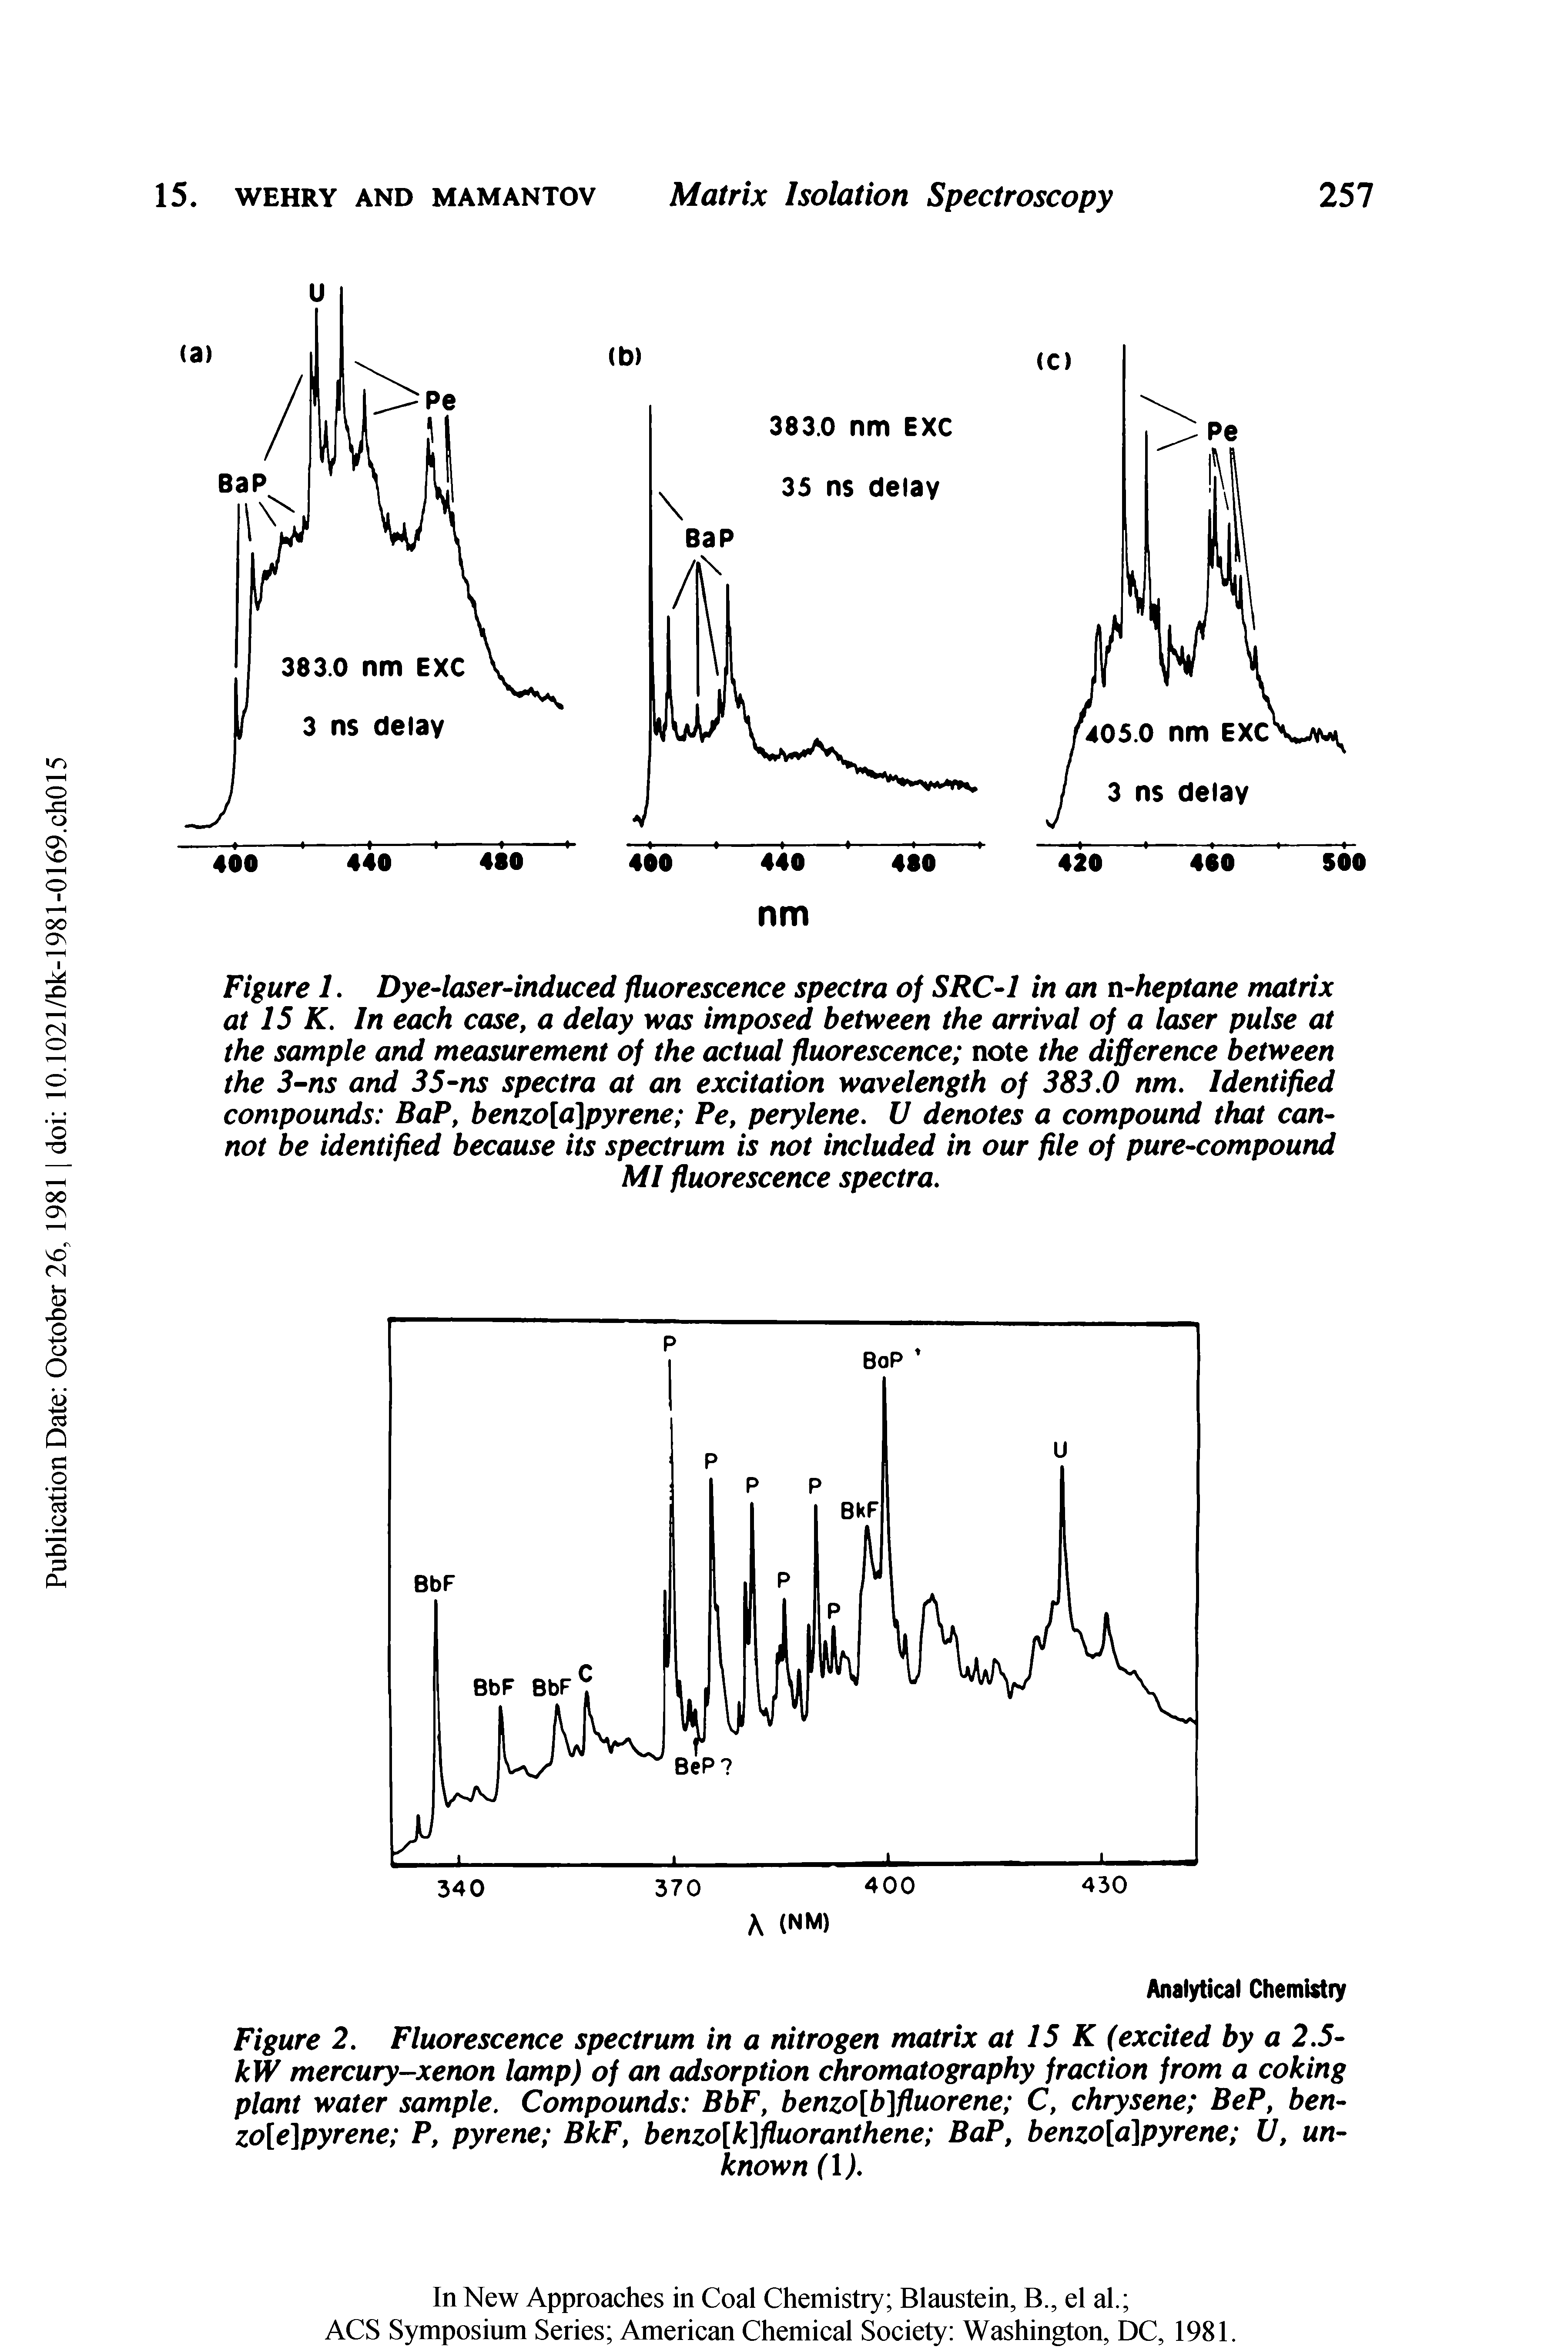 Figure 1. Dye-laser-induced fluorescence spectra of SRC-1 in an n-heptane matrix at 15 K. In each case, a delay was imposed between the arrival of a laser pulse at the sample and measurement of the actual fluorescence note the difference between the 3-ns and 35-ns spectra at an excitation wavelength of 383.0 nm. Identified compounds BaP, benzo[a]pyrene Pe, perylene. U denotes a compound that cannot be identified because its spectrum is not included in our file of pure-compound...